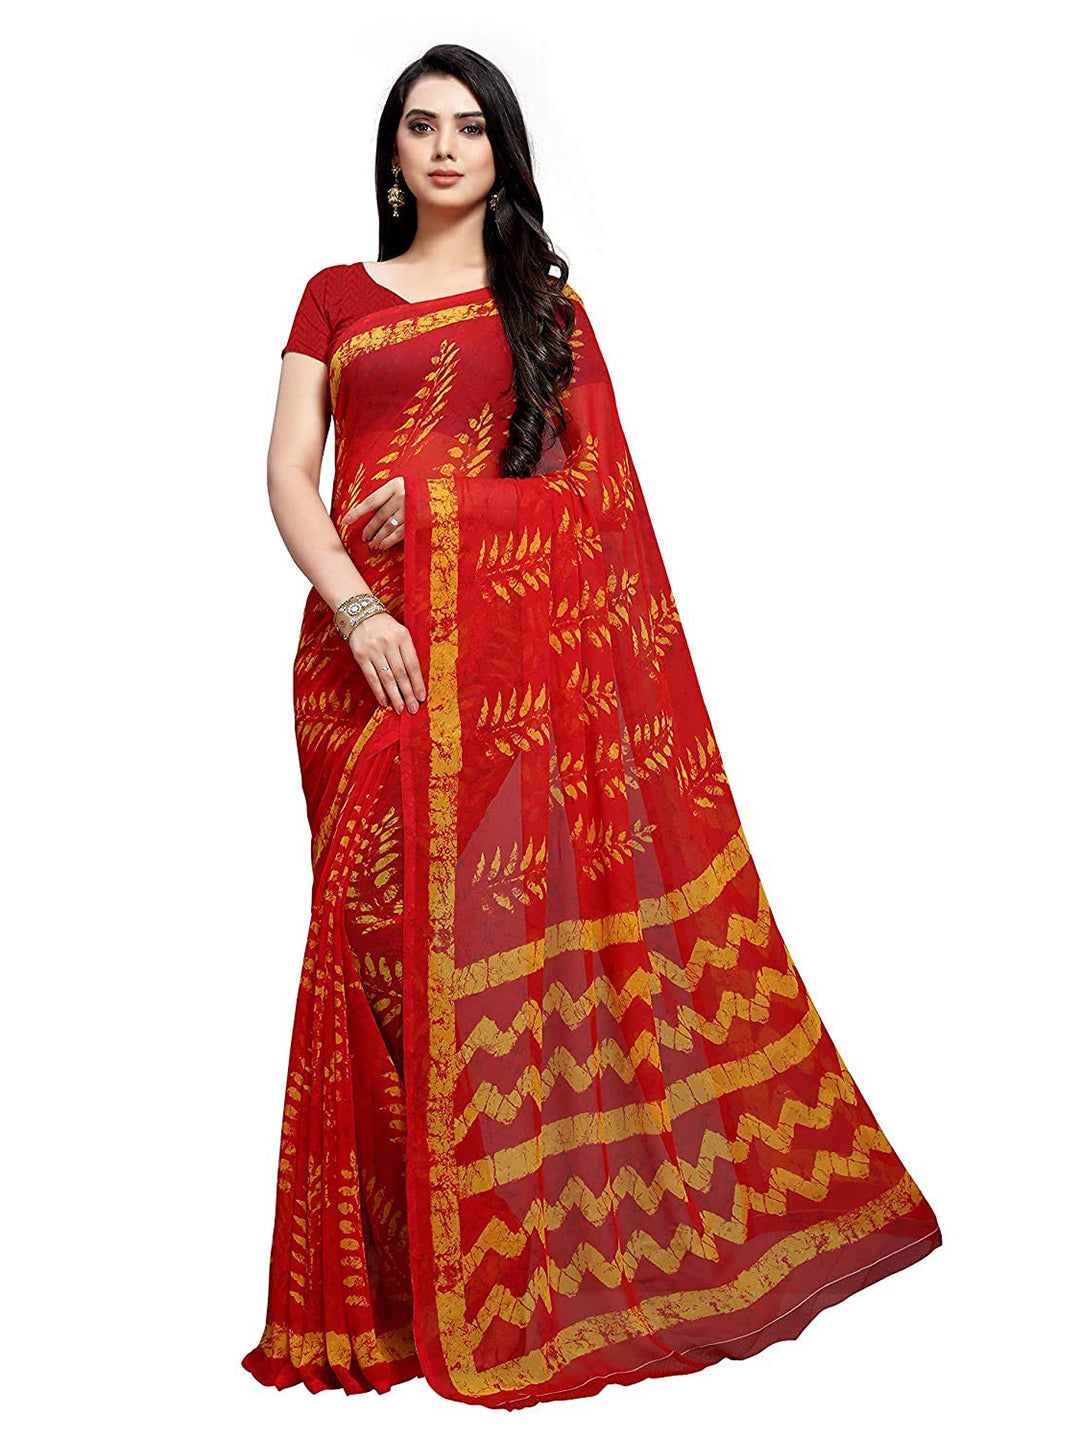 Women's Red Georgette Dyed Saree - Ahika